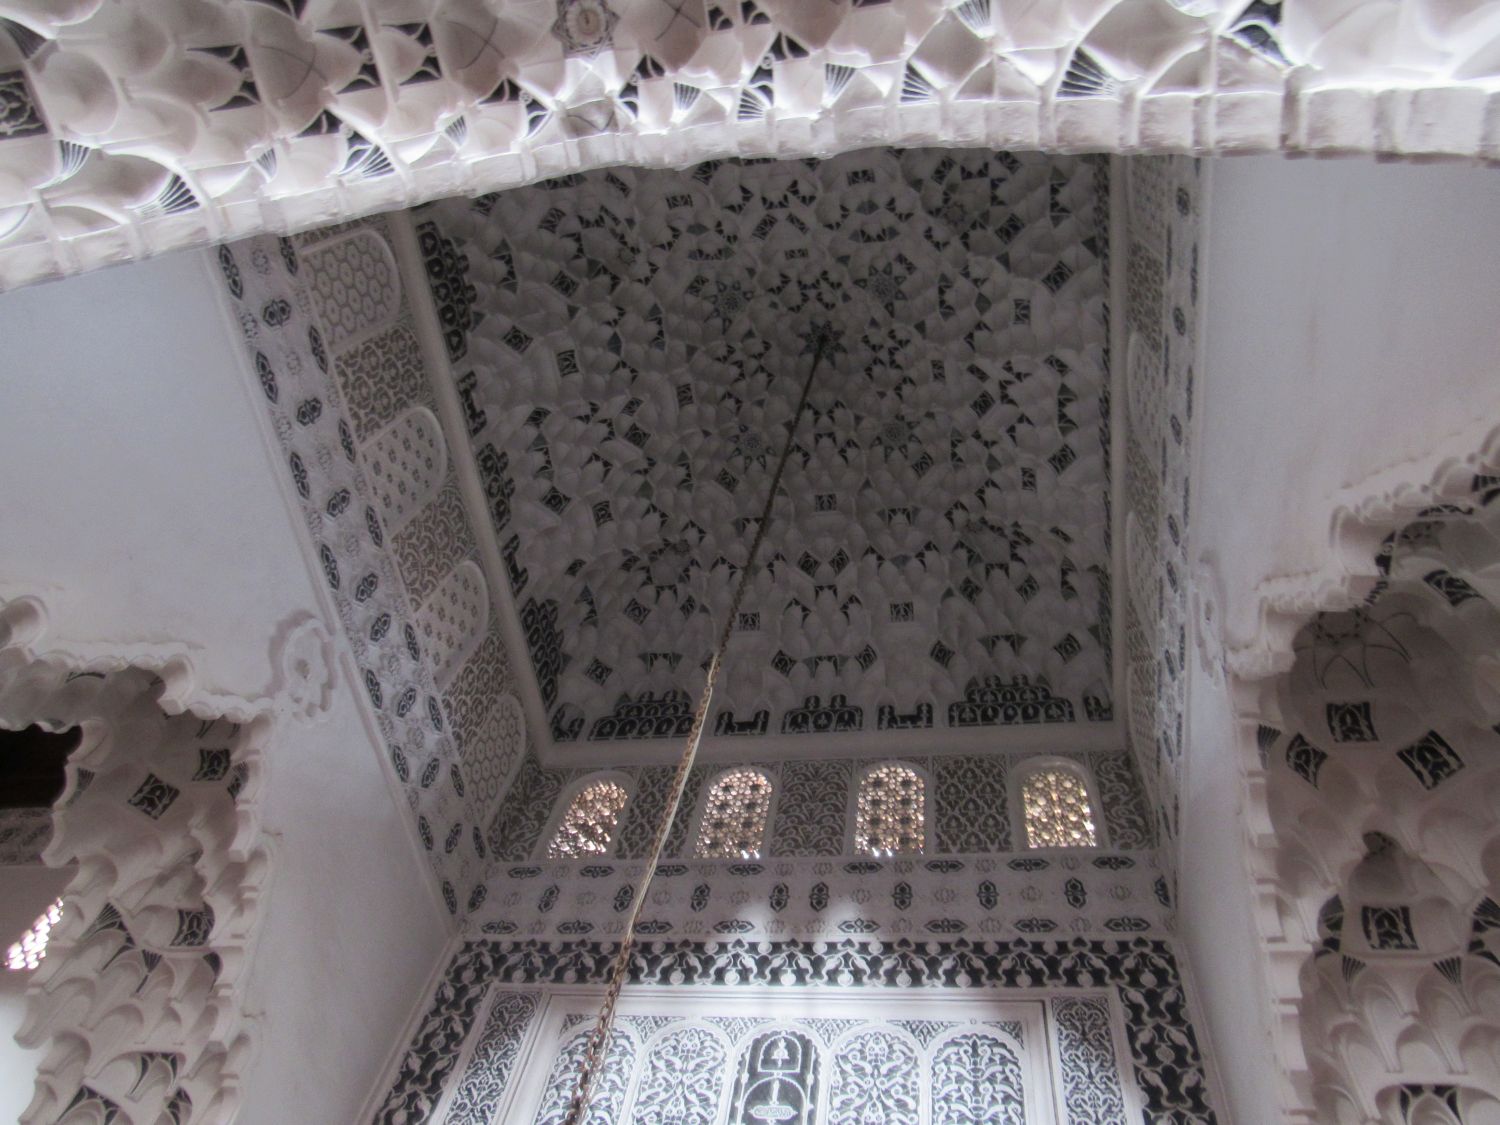 Upward view of the mihrab bay ceiling decorated with black and white muqarnas